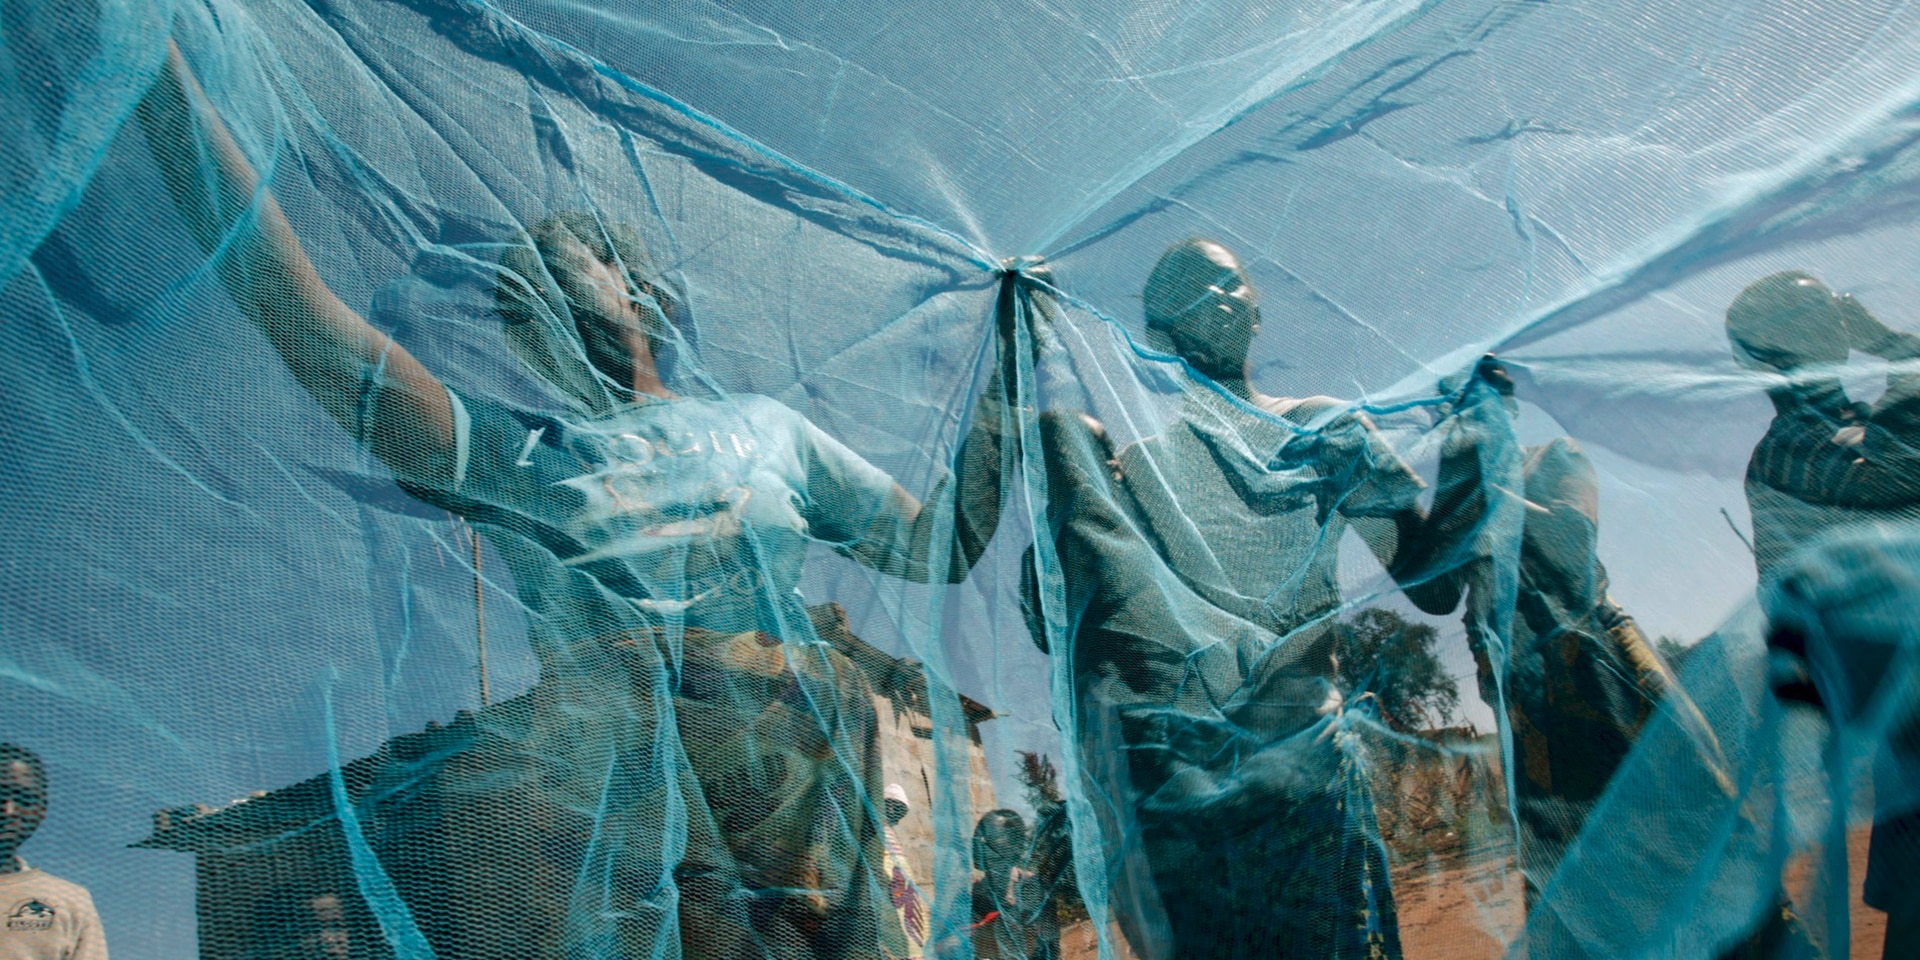 Some children hold up a large blue mosquito net.